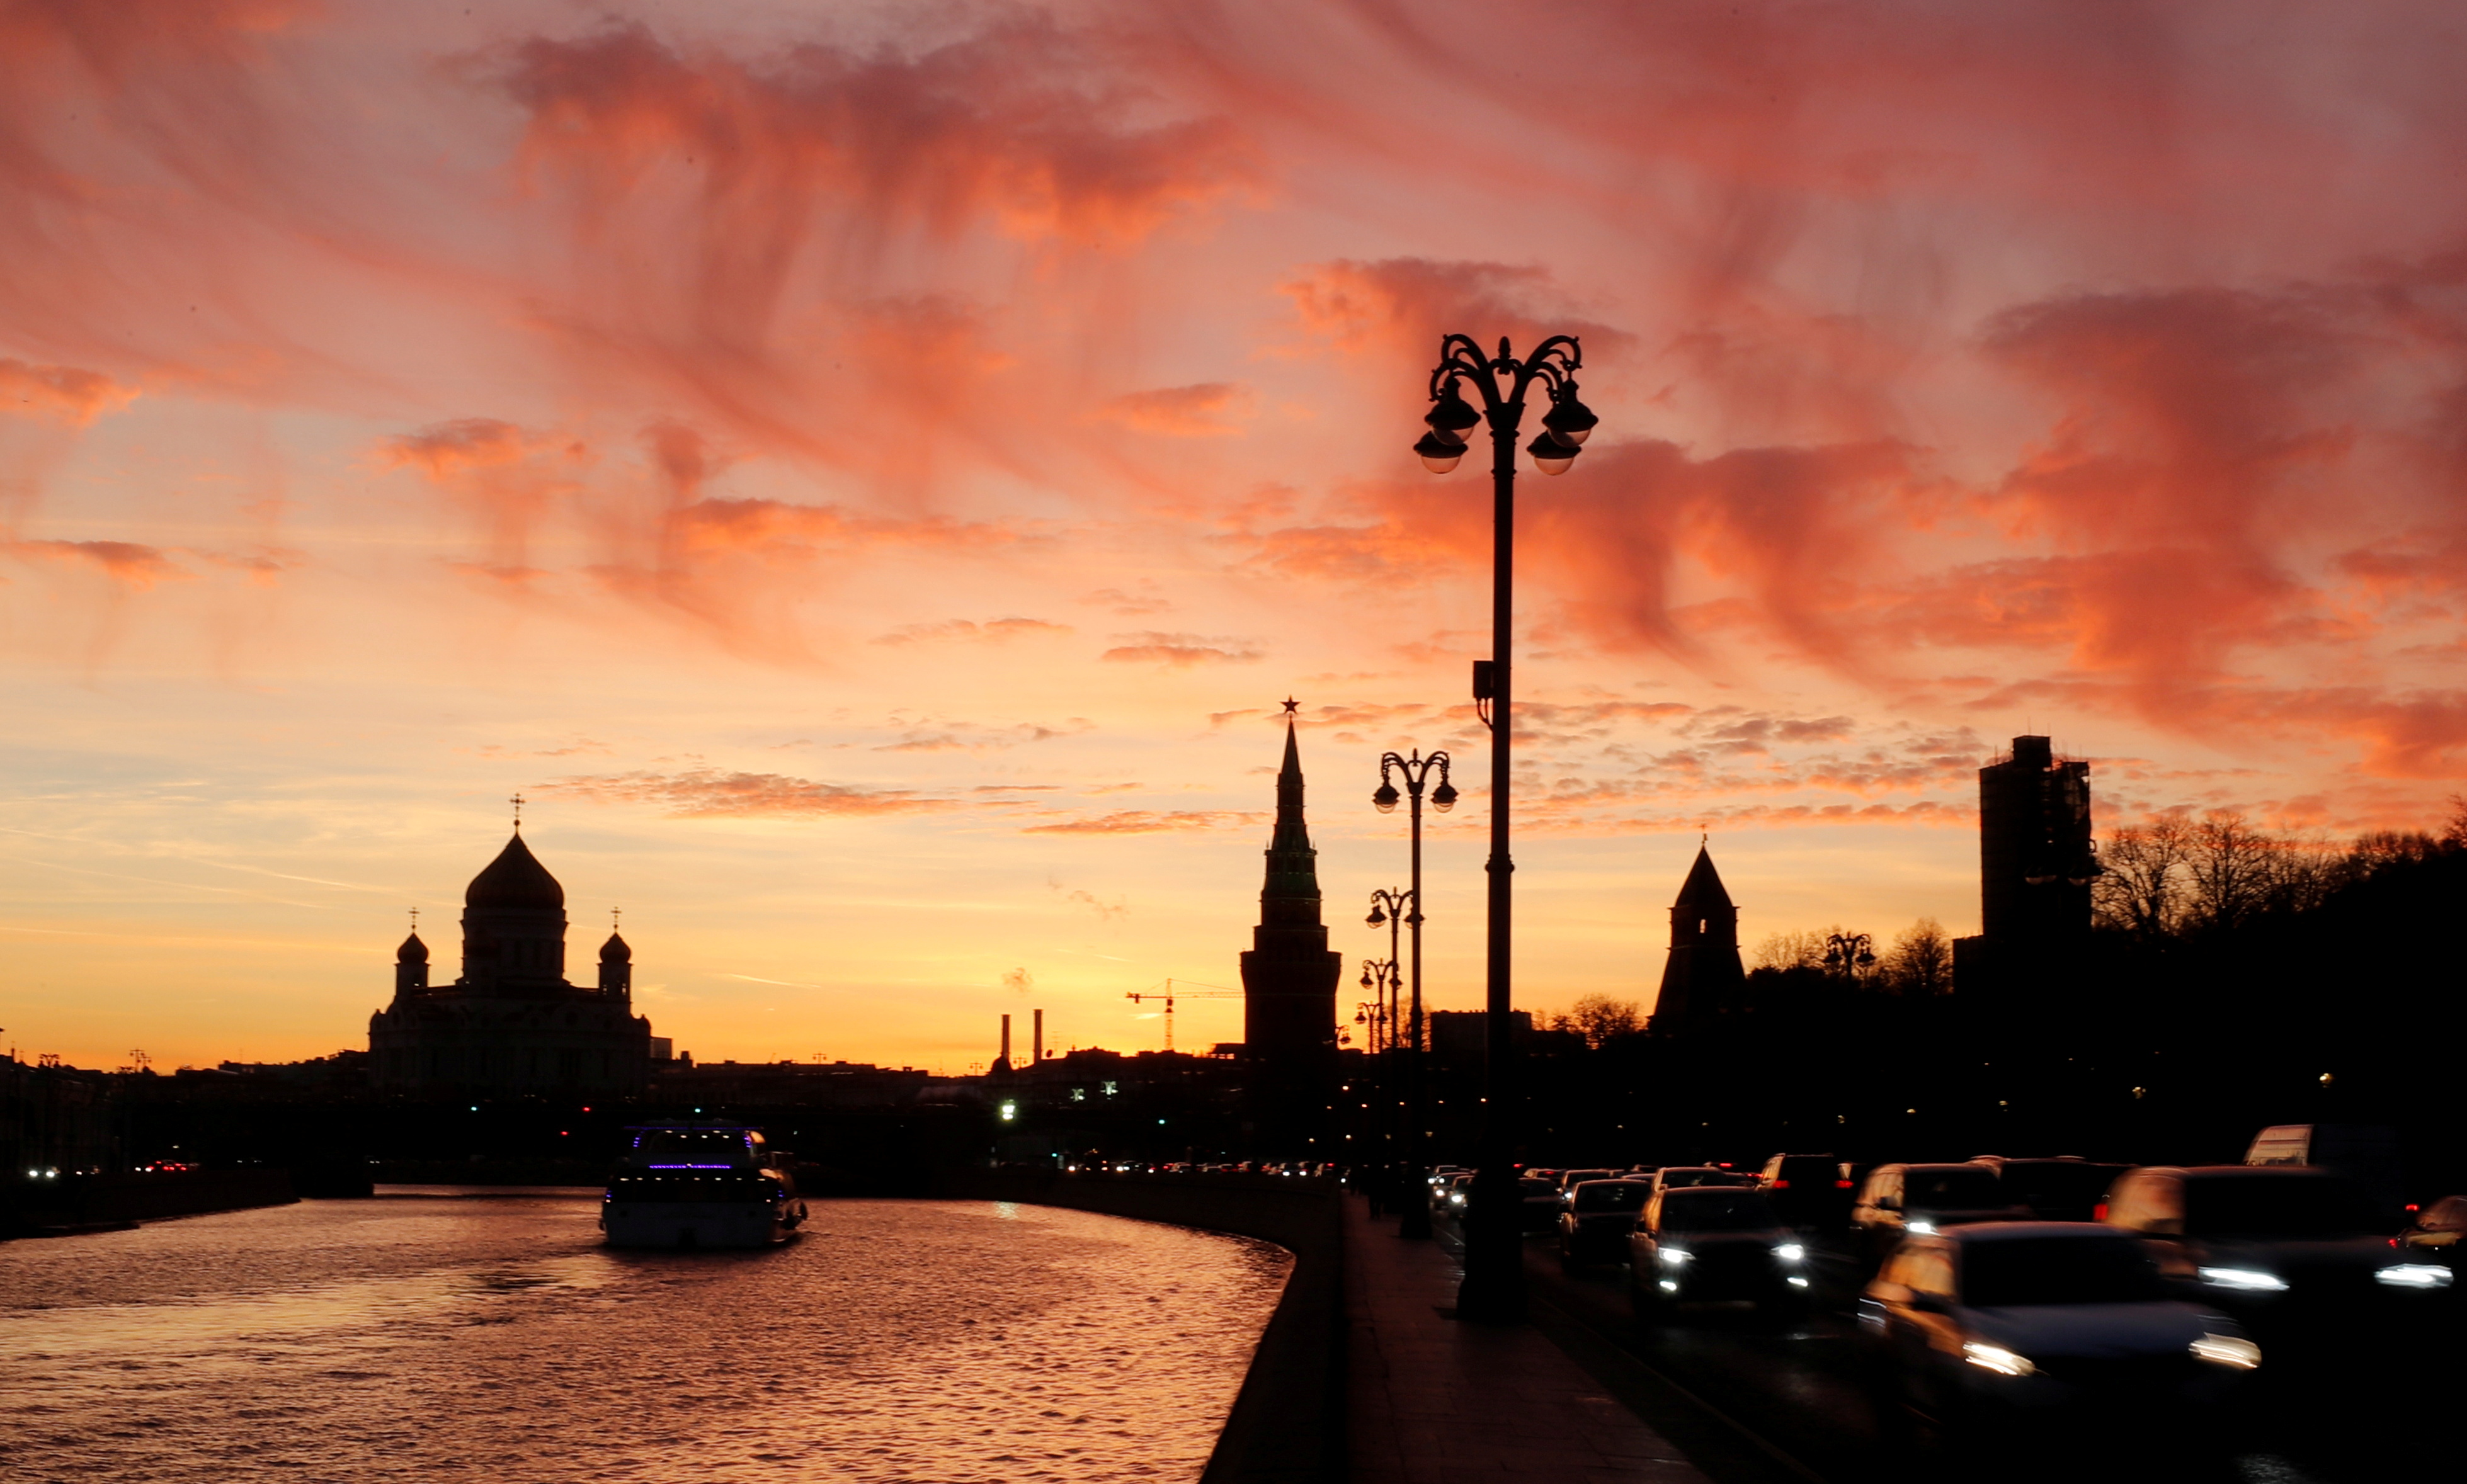 Vehicles travel along the embankment of the Moskva River during sunset in Moscow